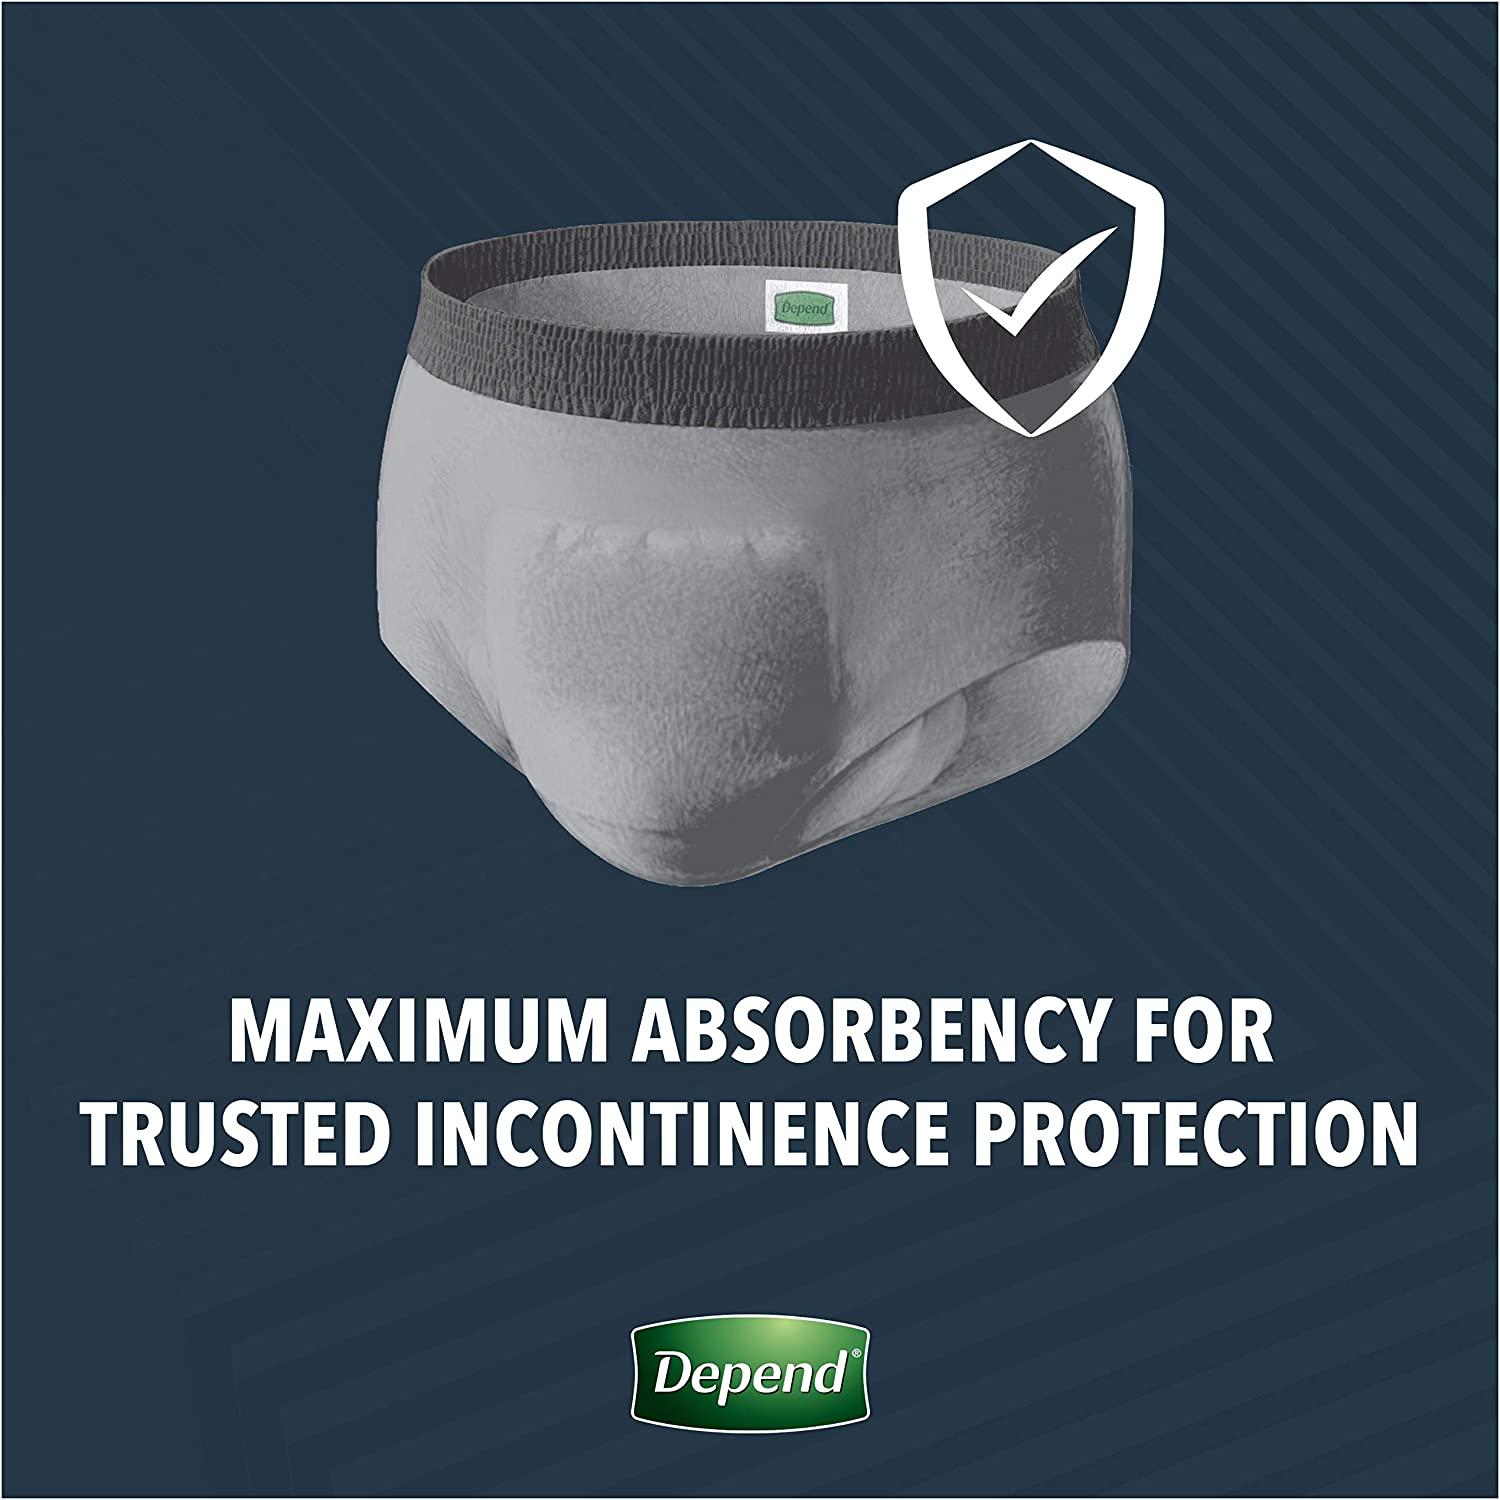 Depend Real Fit Incontinence Underwear for Men, Maximum Absorbency,  Disposable, Large/Extra-Large, Grey, 20 Count (Packaging May Vary)